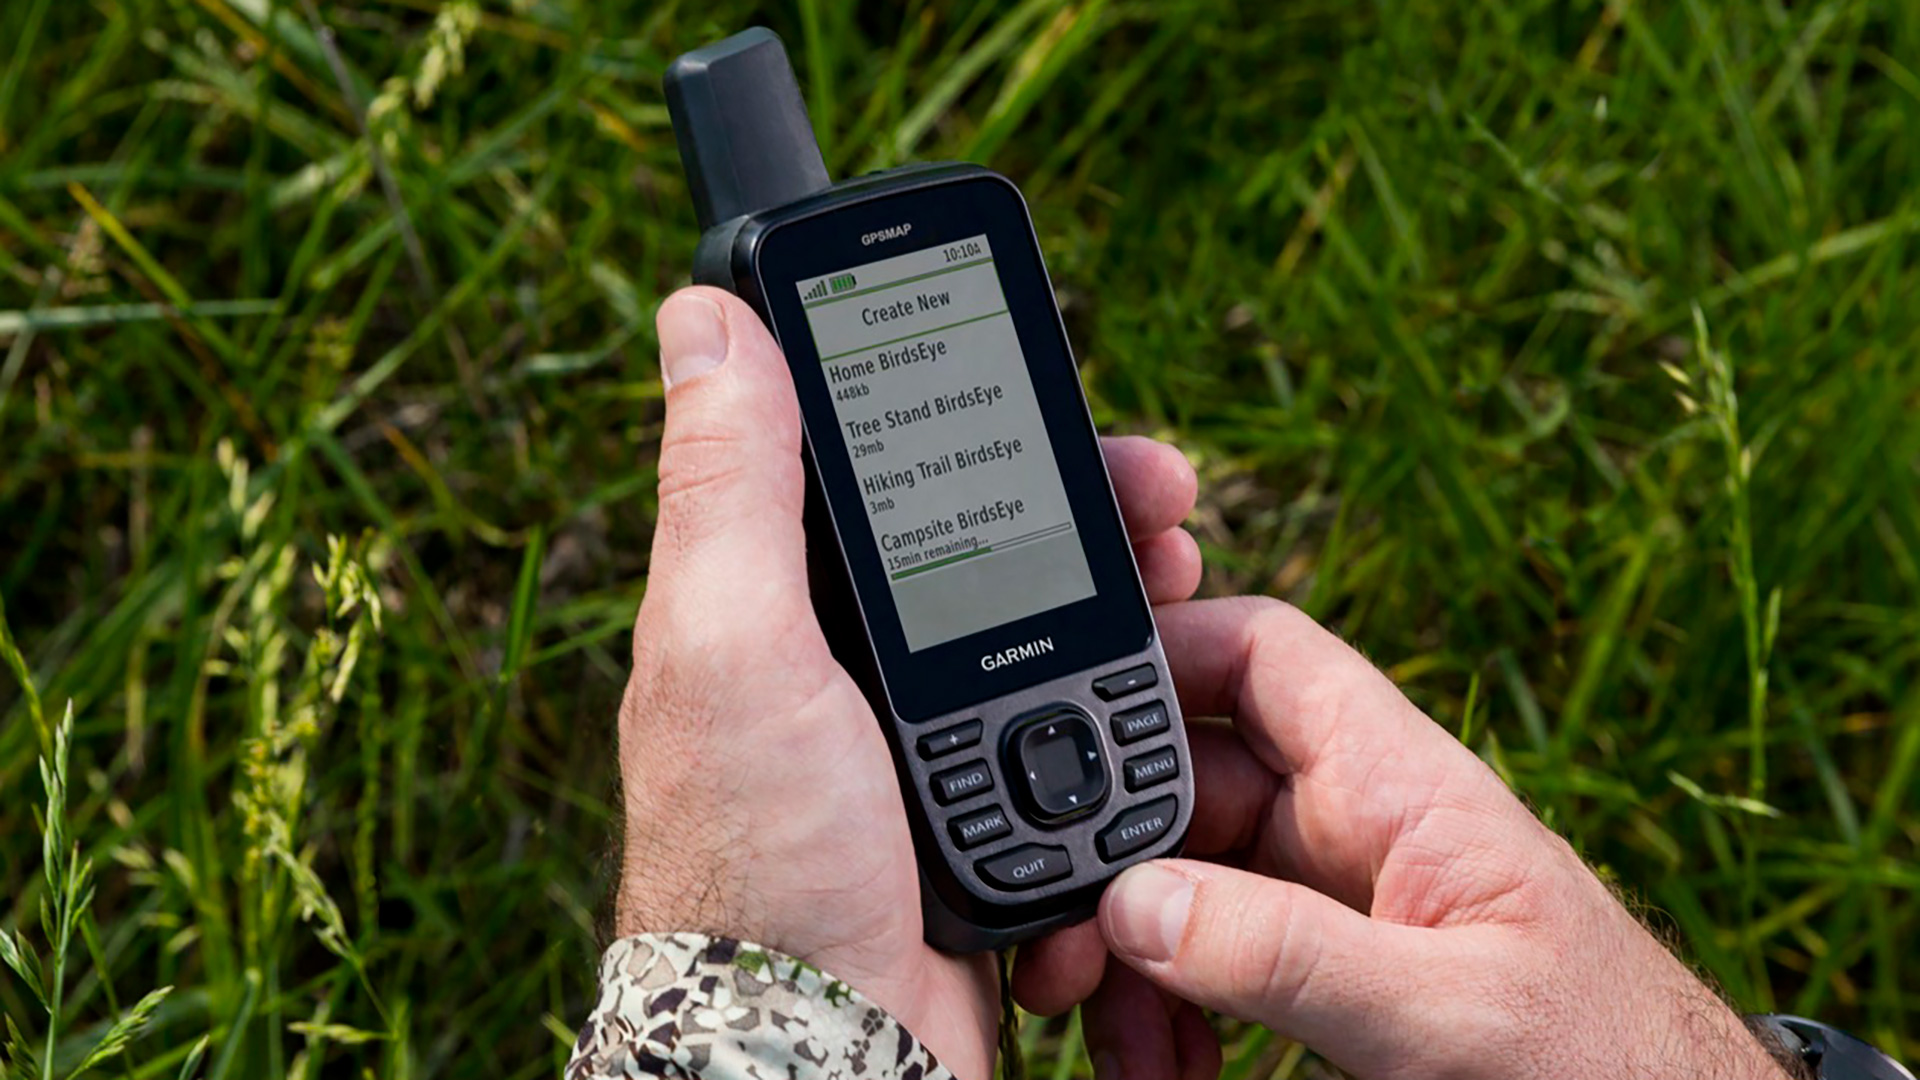 haspel lastig Inwoner First Look: Garmin GPSMAP 67 and eTrex SE Handheld GPS Units | An Official  Journal Of The NRA